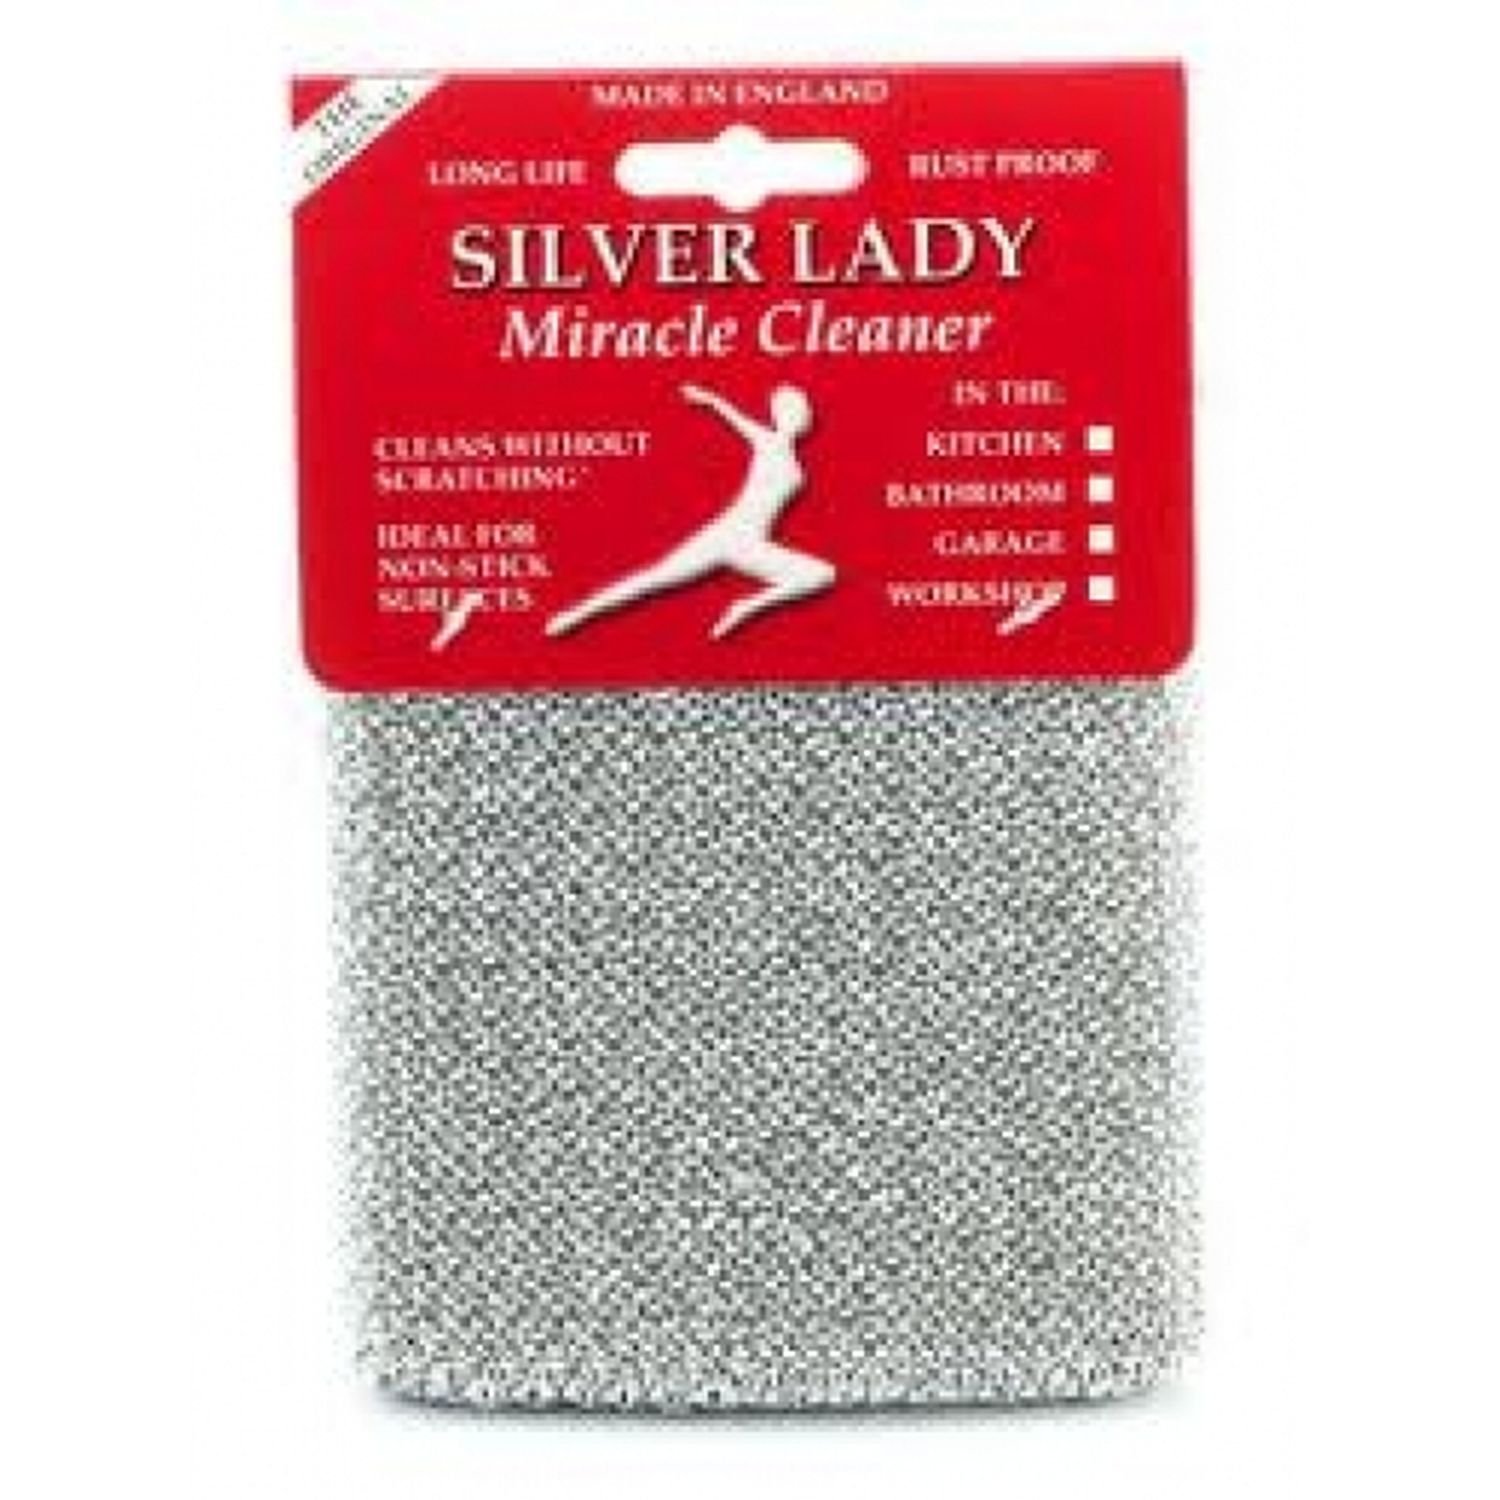 Silver Lady Miracle Cleaner Pkt 12